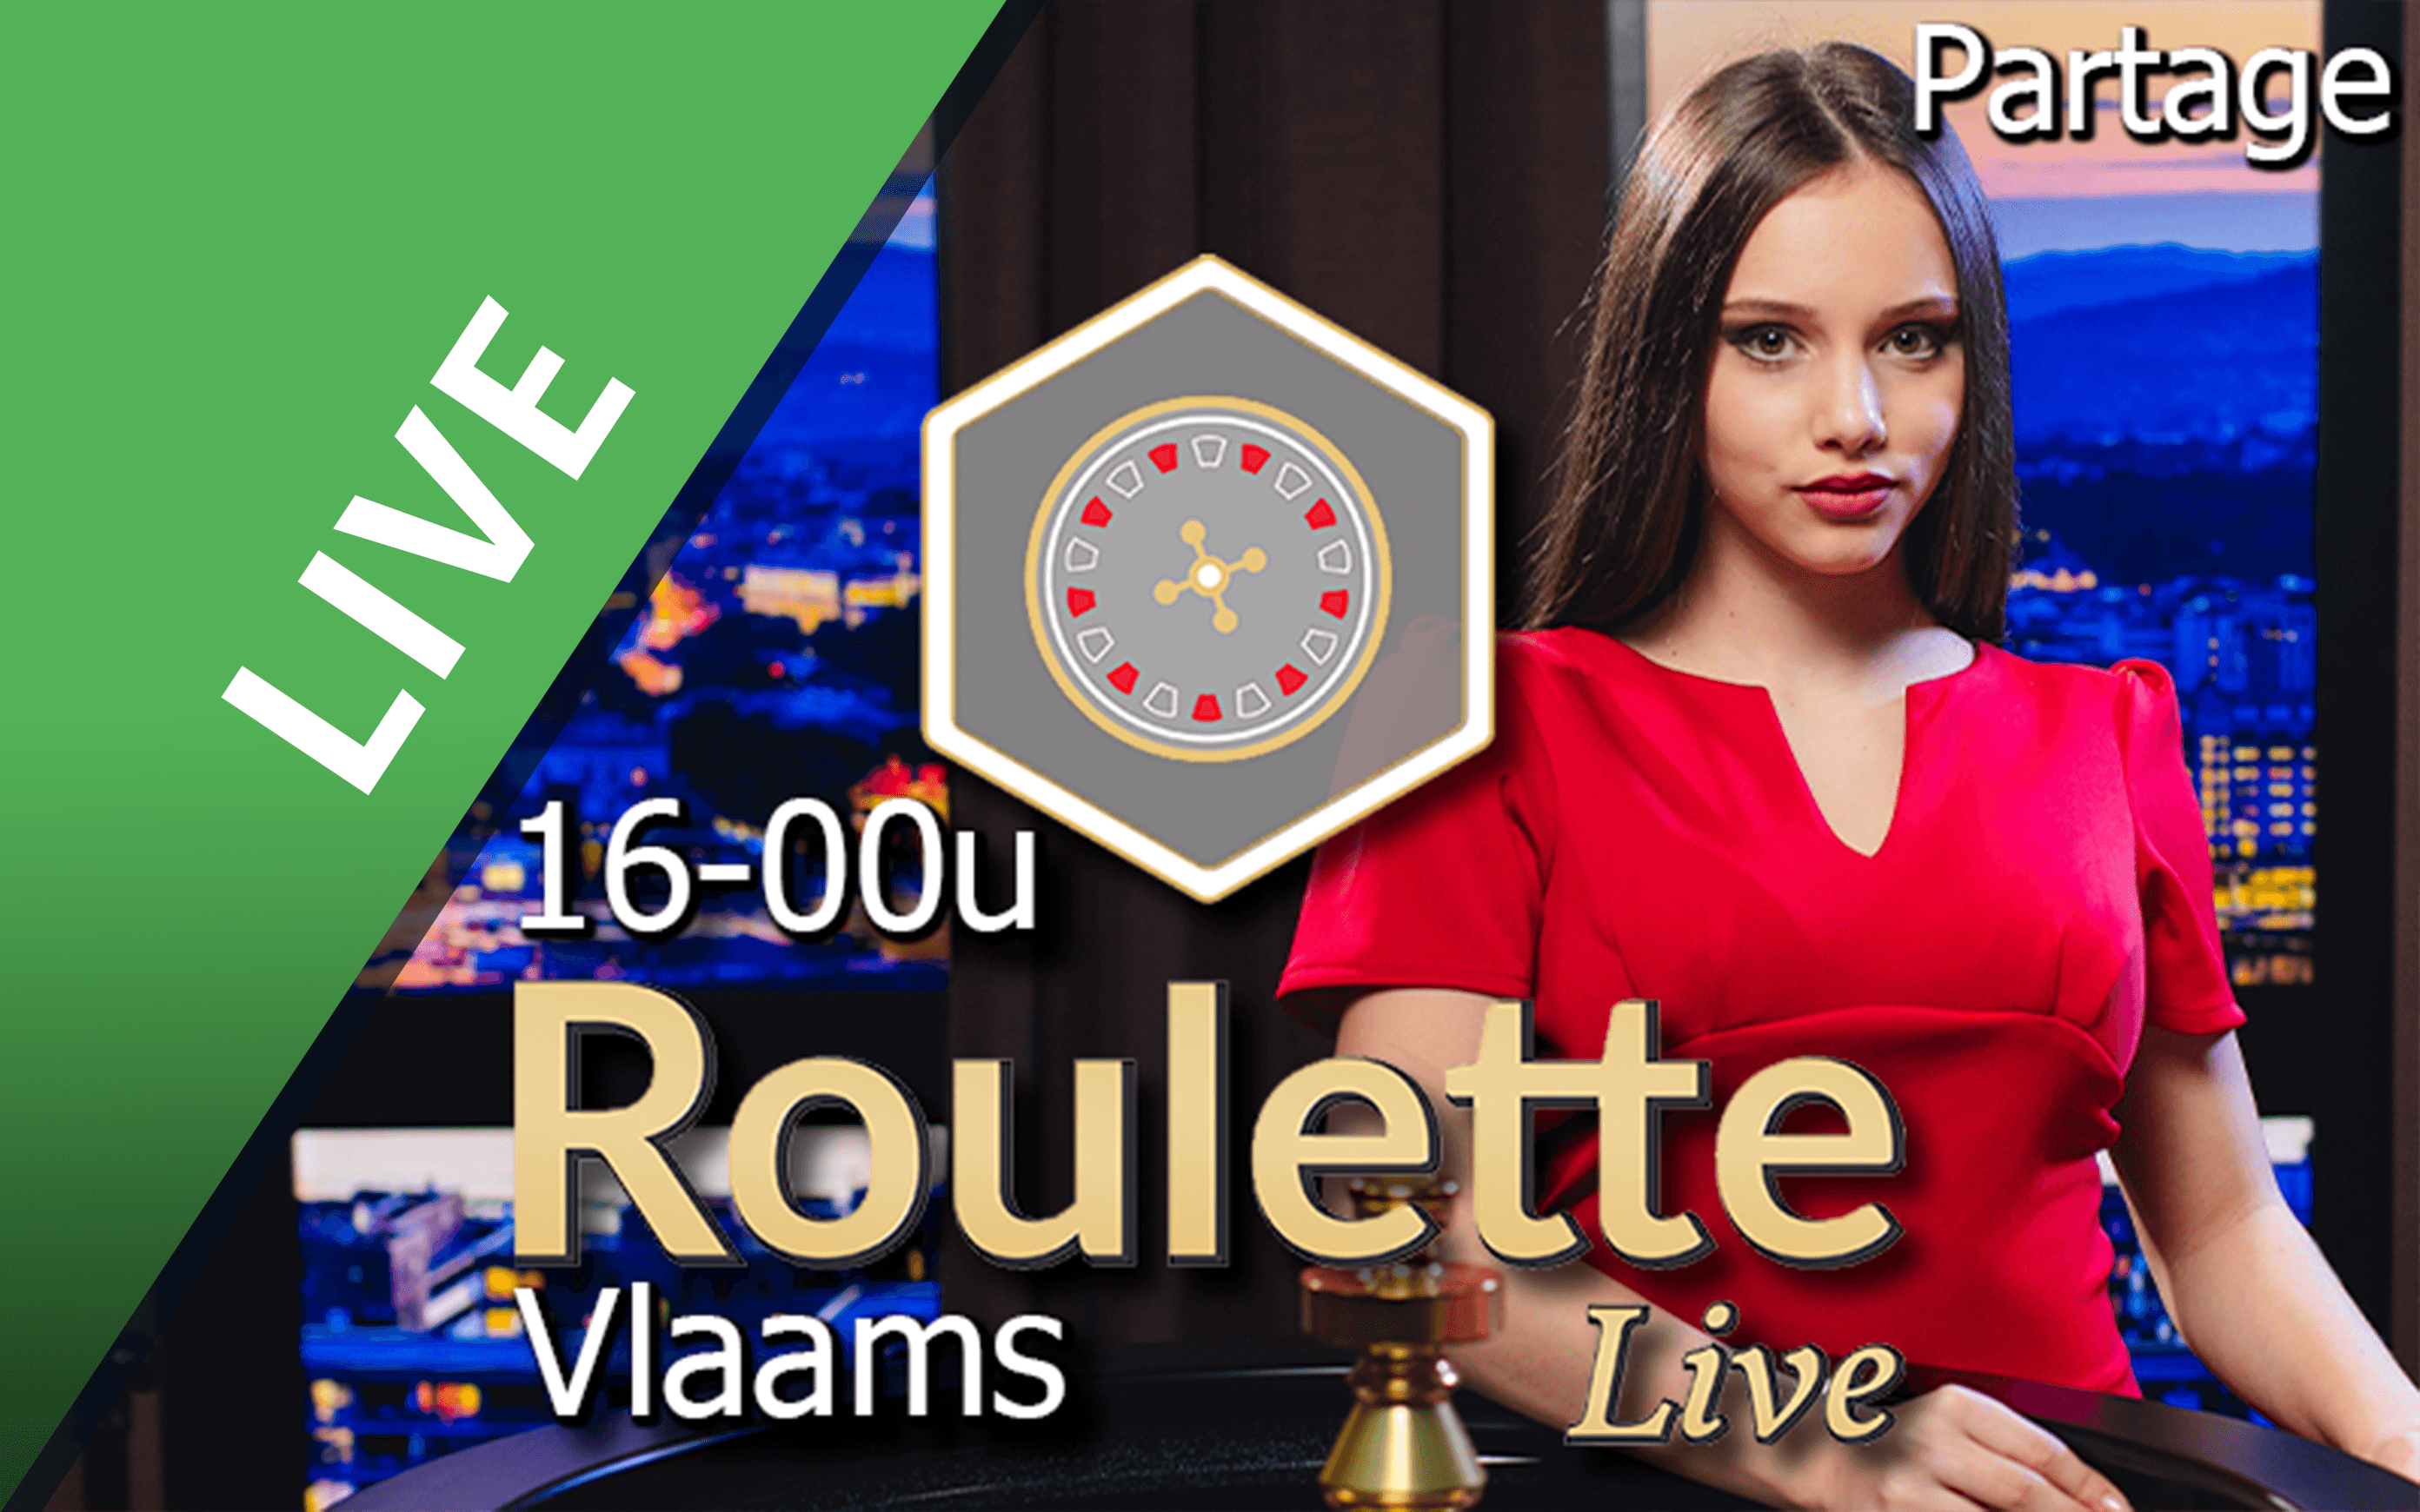 Play Vlaamse Roulette Partage on Starcasino.be online casino